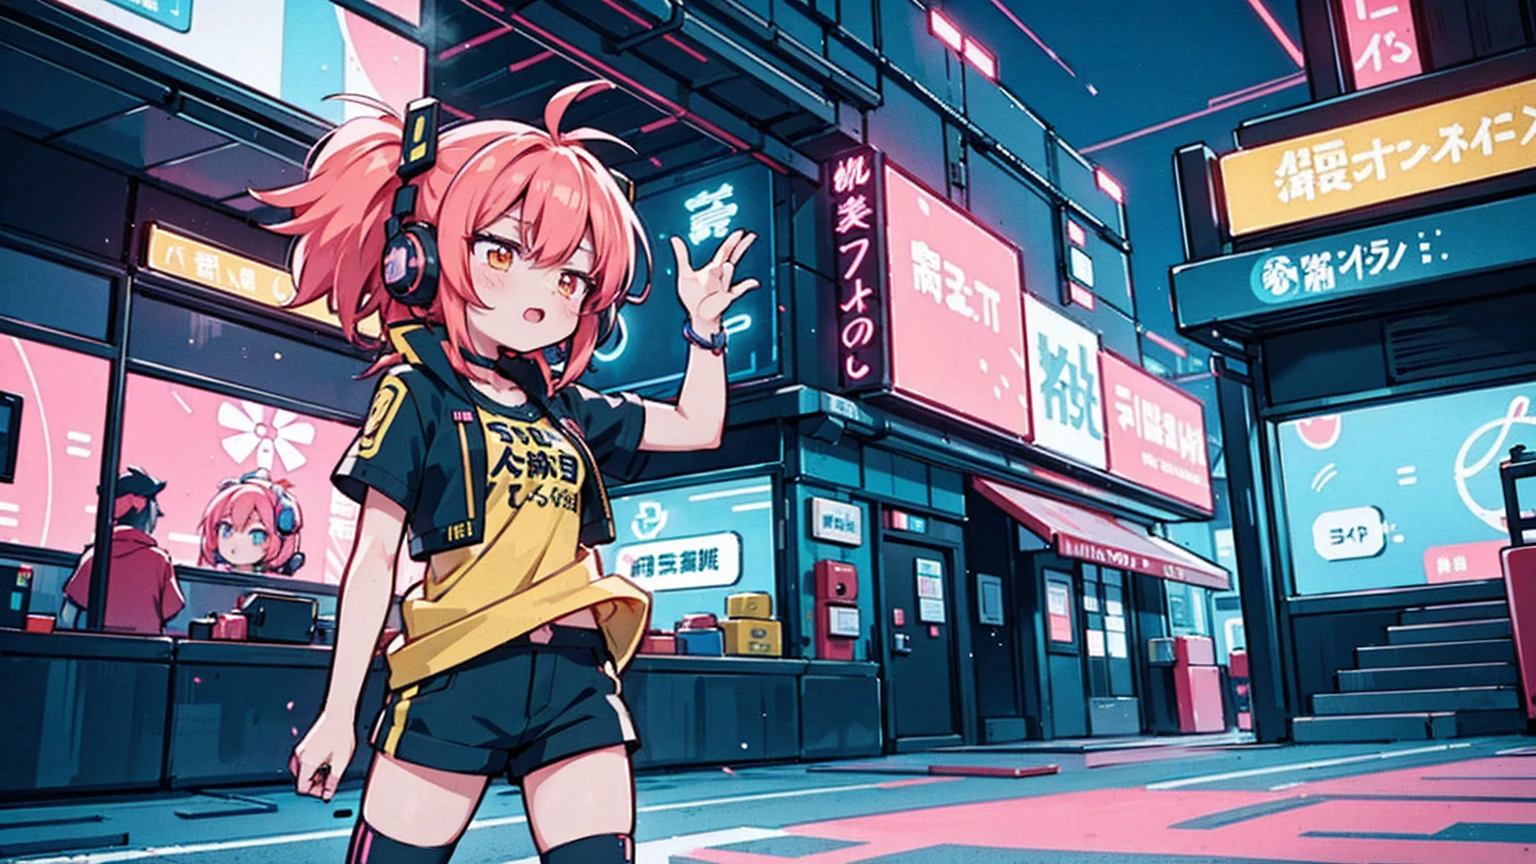 The image depicts an anime-style character, a dynamic female character striking a lively pose with vibrant pink hair accented with yellow highlights. She wears a large ribbon and a headset, sporting a dark-toned top and shorts in a contemporary style. The character harmonizes with the neon sign in the background, illuminated by the neon lights.

The background features multiple neon signs with Japanese characters, illustrating a bright city night scene. The screen displays the word "SPASMODIC," which means "convulsive" in Japanese, adding to the active and energetic atmosphere portrayed through the signs and visual effects. Overall, the image exudes a cyberpunk or futuristic vibe with vivid colors and a dynamic feel.